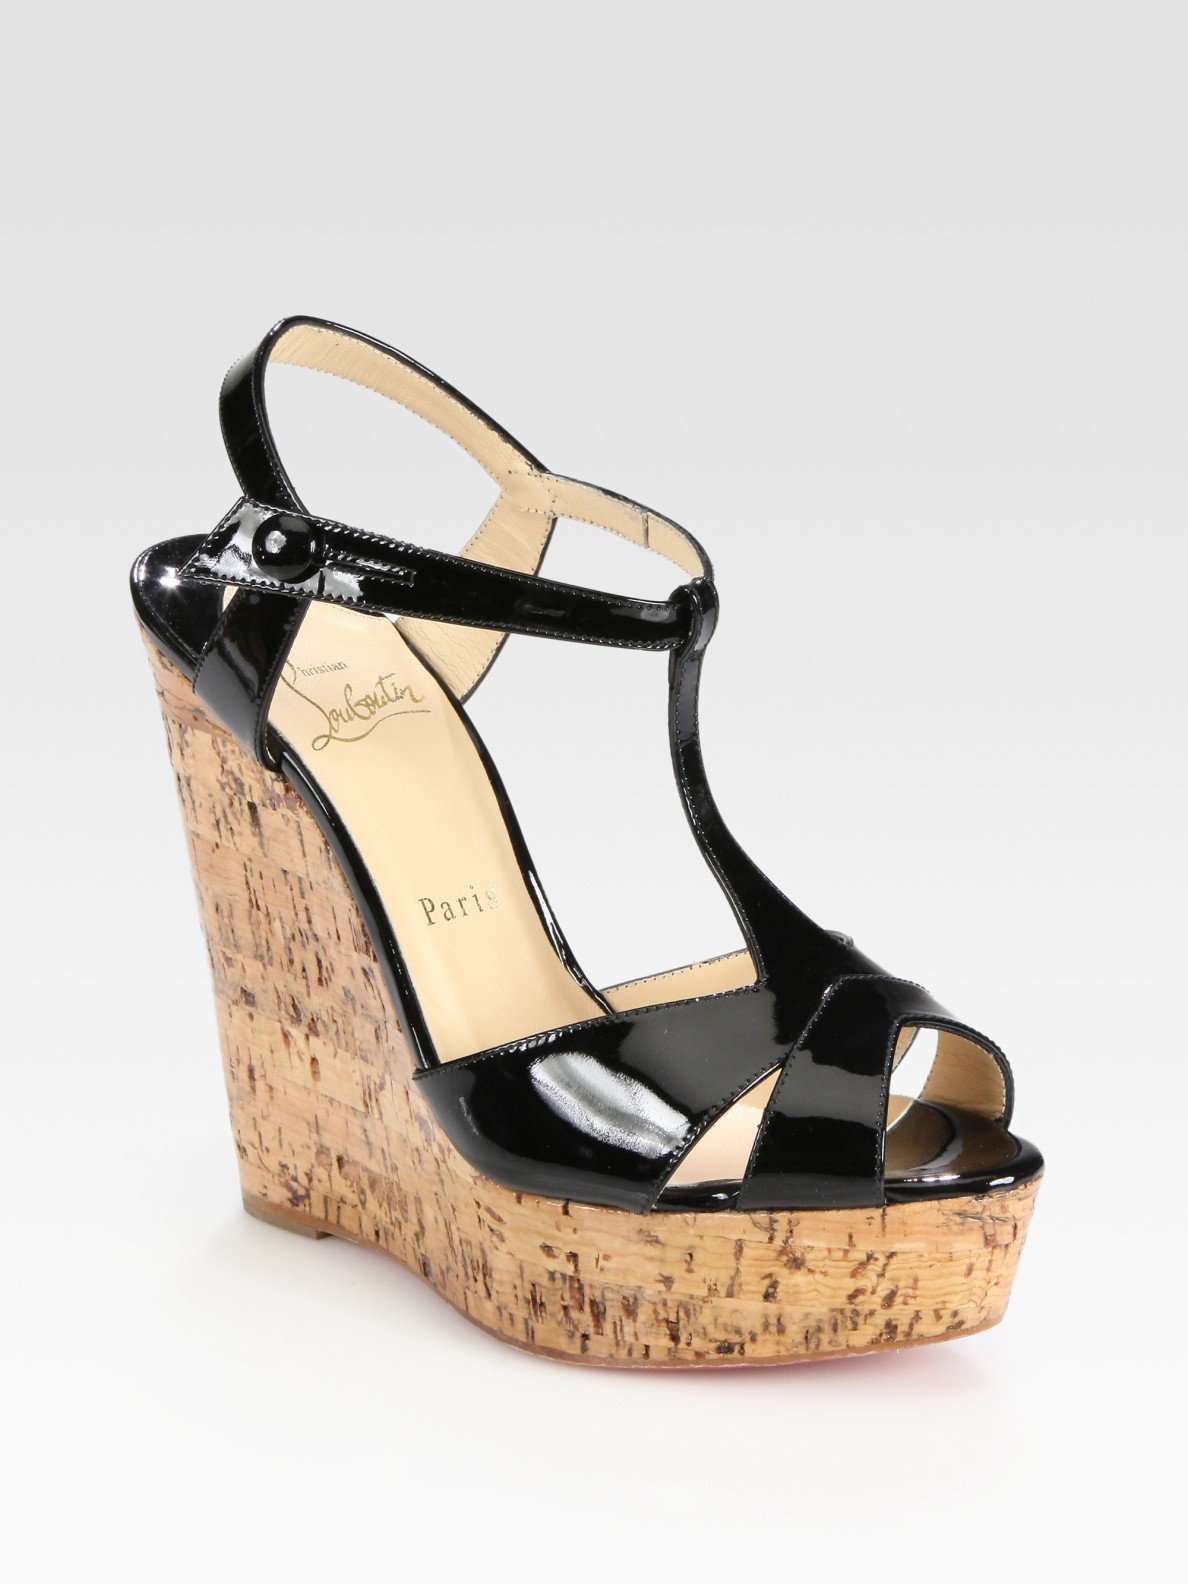 christian louboutin wedge sandals Black patent leather cross-over ...